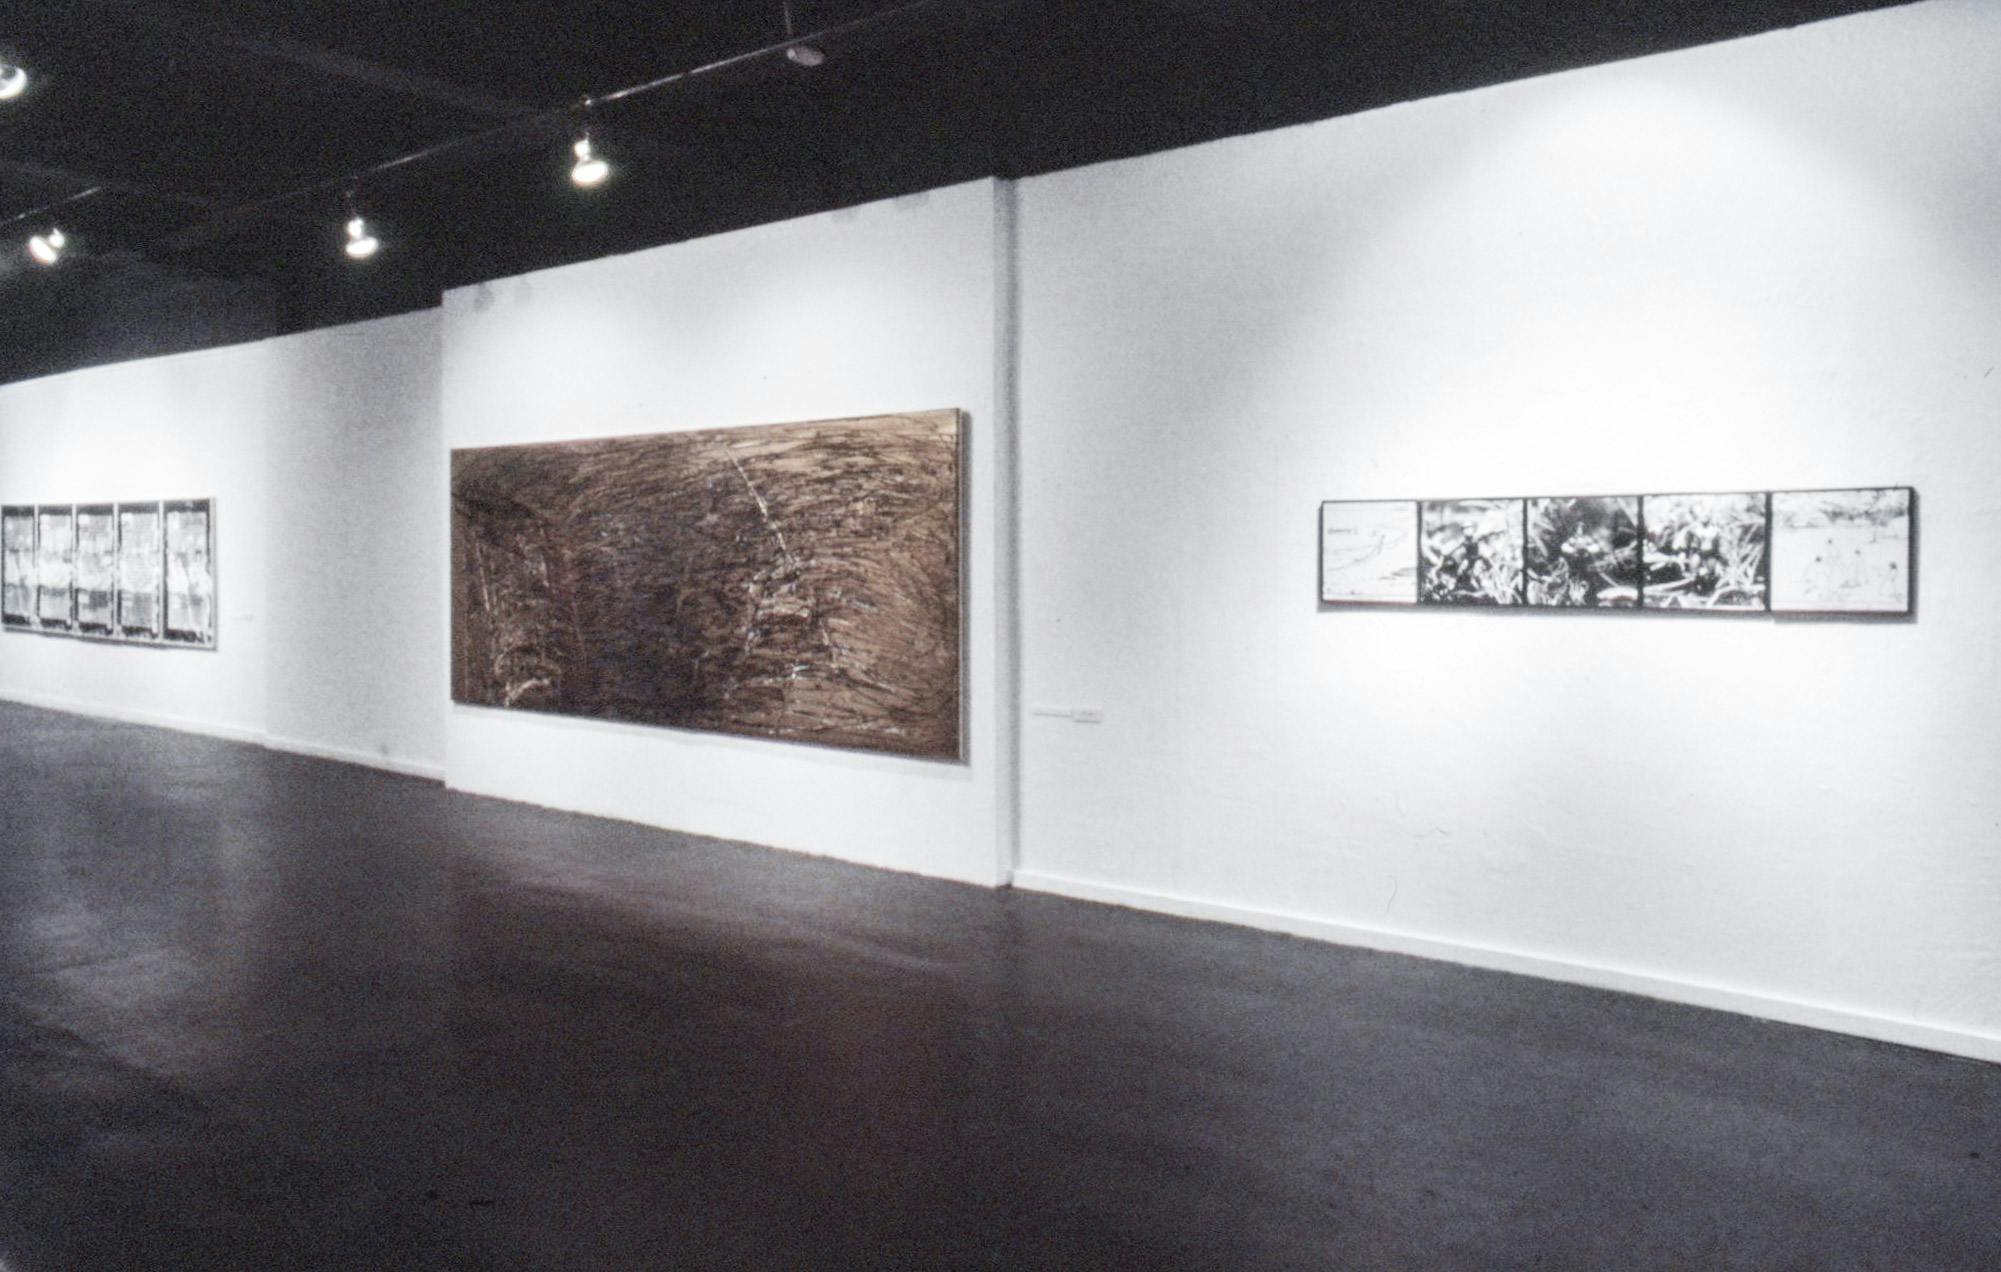 Several artworks on the wall of a gallery. At the centre there is a large abstract painting made of rough black and gold marks on canvas. On the sides, there are sets of black and white photos.